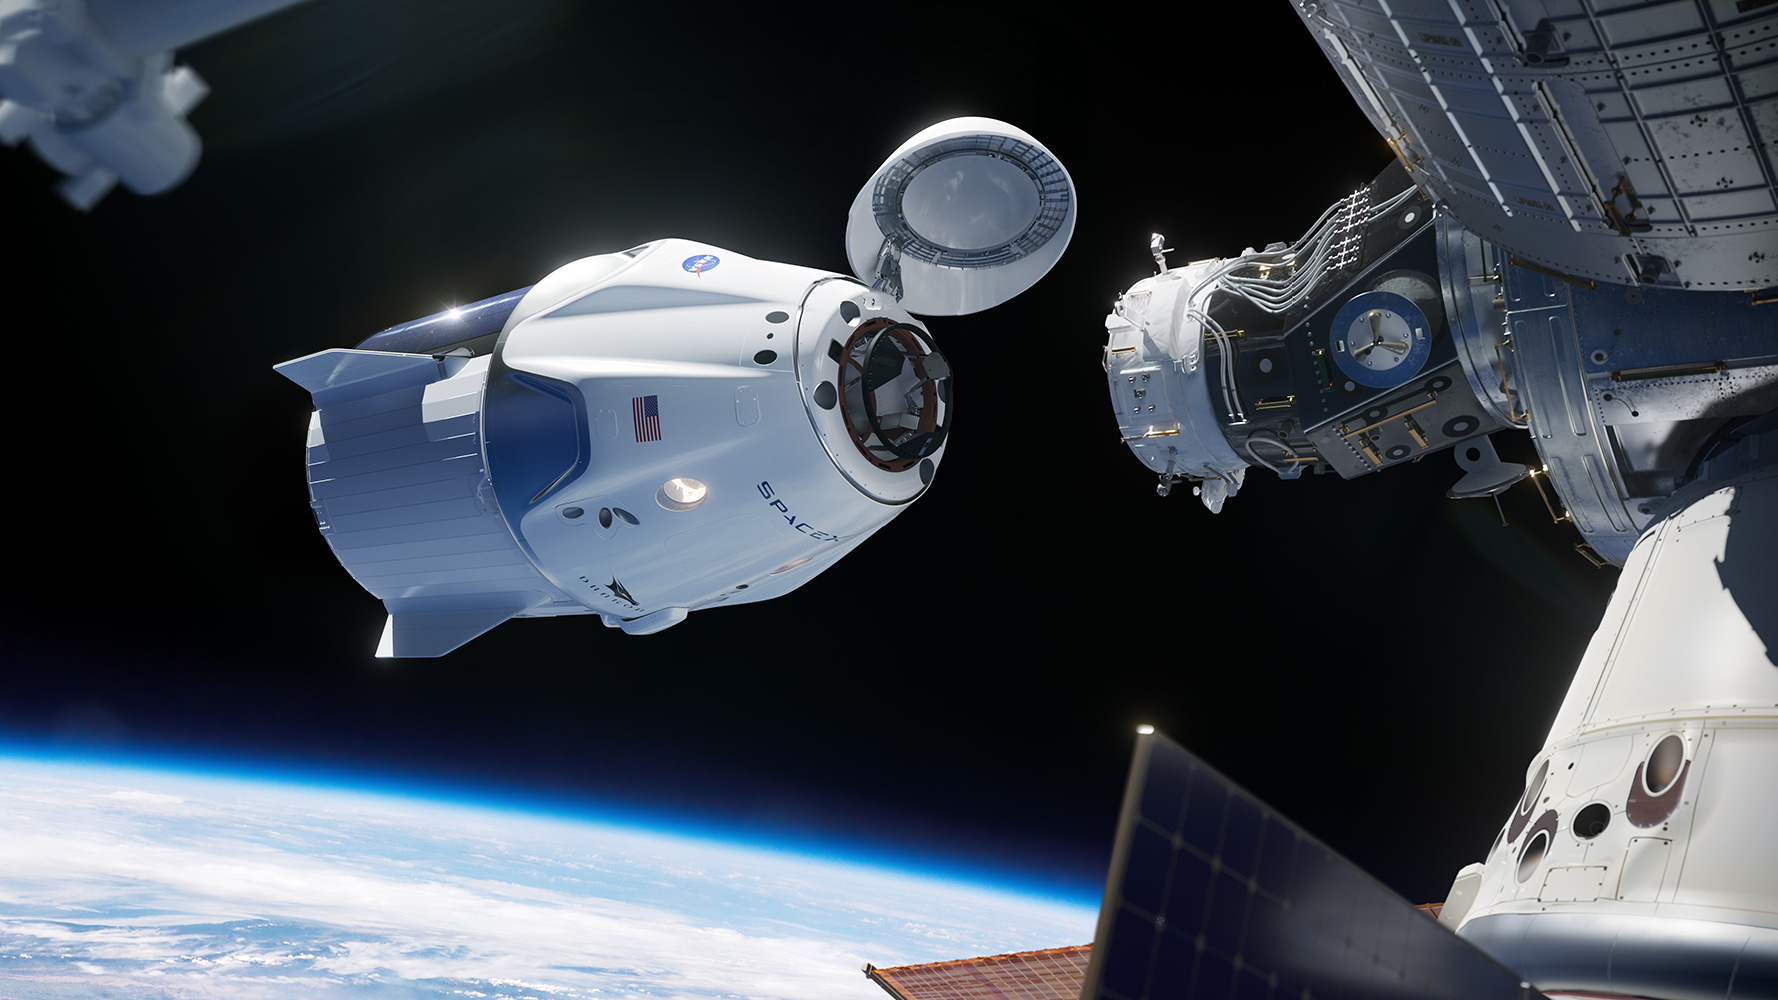 SpaceX Capsule Docking with International Space Station adapted from nasa.gov image